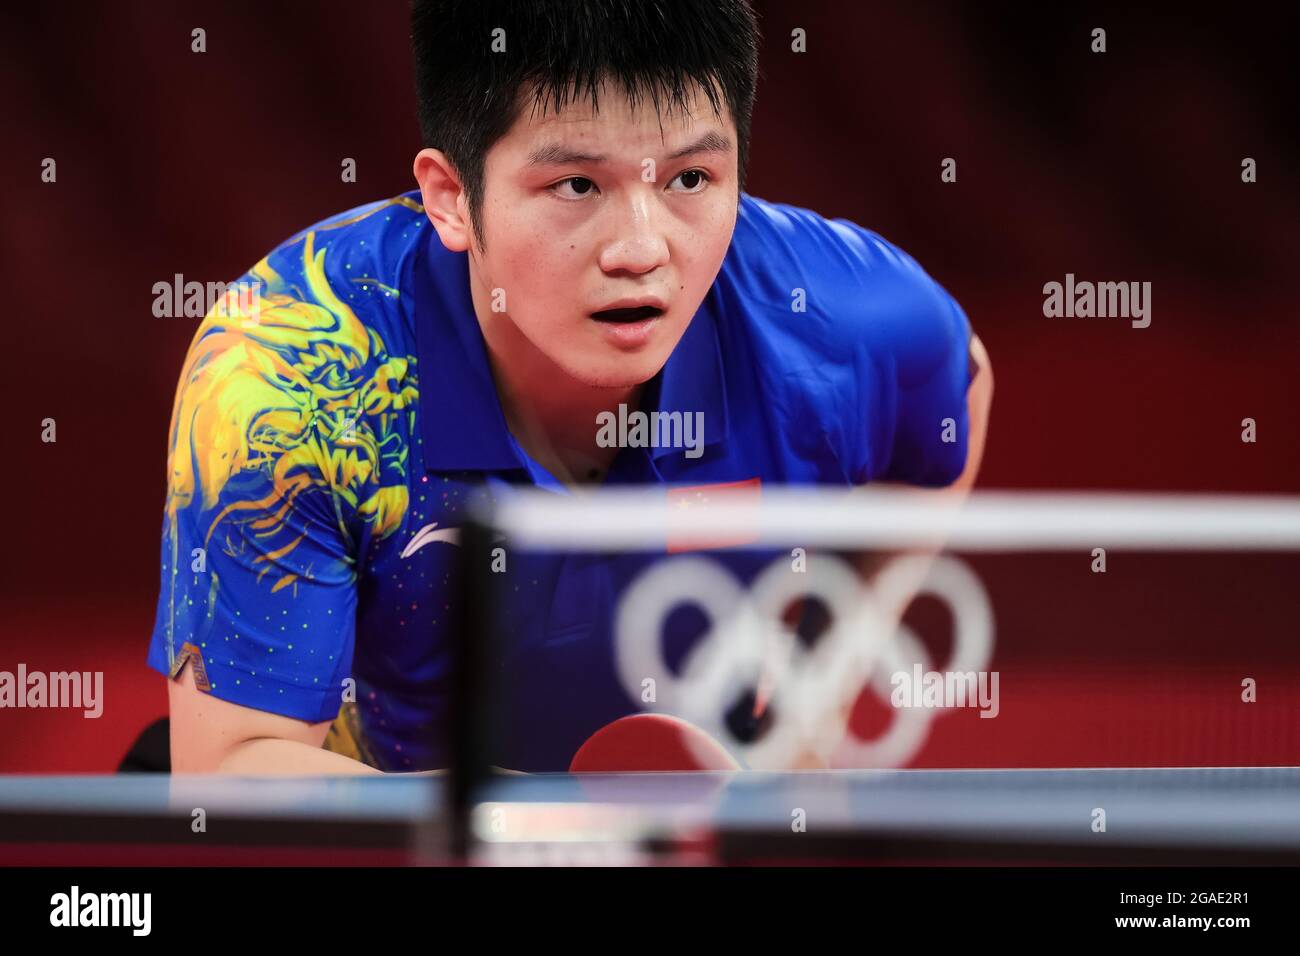 Tokyo, Japan. 30th July, 2021. Fan Zhendong about to receive during the Men's Table Tennis Singles Gold Medal Match between Fan Zhendong of China and Ma Long of China on Day 7 of the Tokyo 2020 Olympic Games. Credit: Pete Dovgan/Speed Media/Alamy Live News Stock Photo